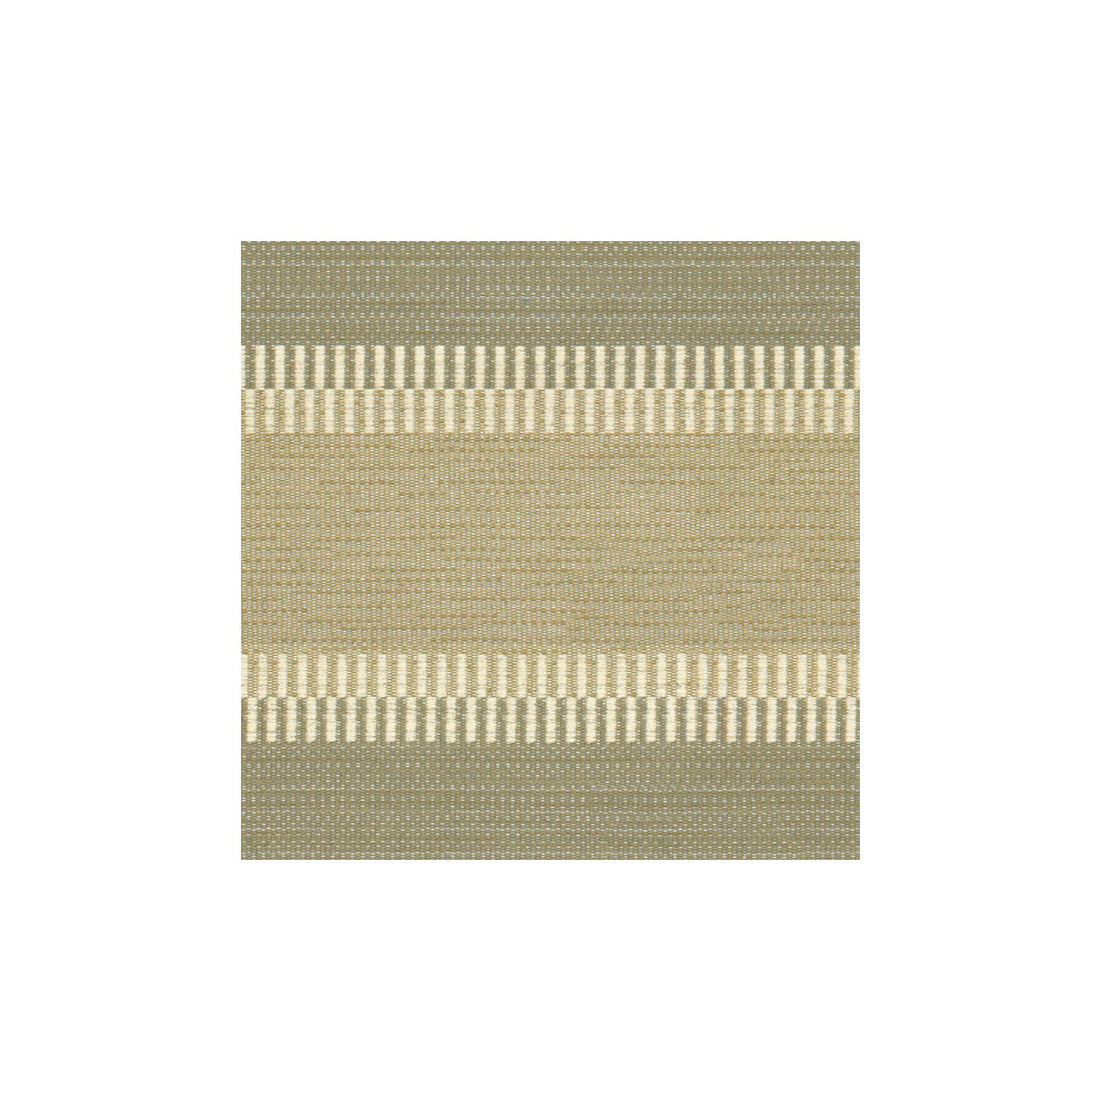 Dorinda Stripe fabric in taupe/grey color - pattern 2012128.116.0 - by Lee Jofa in the The Karenza collection